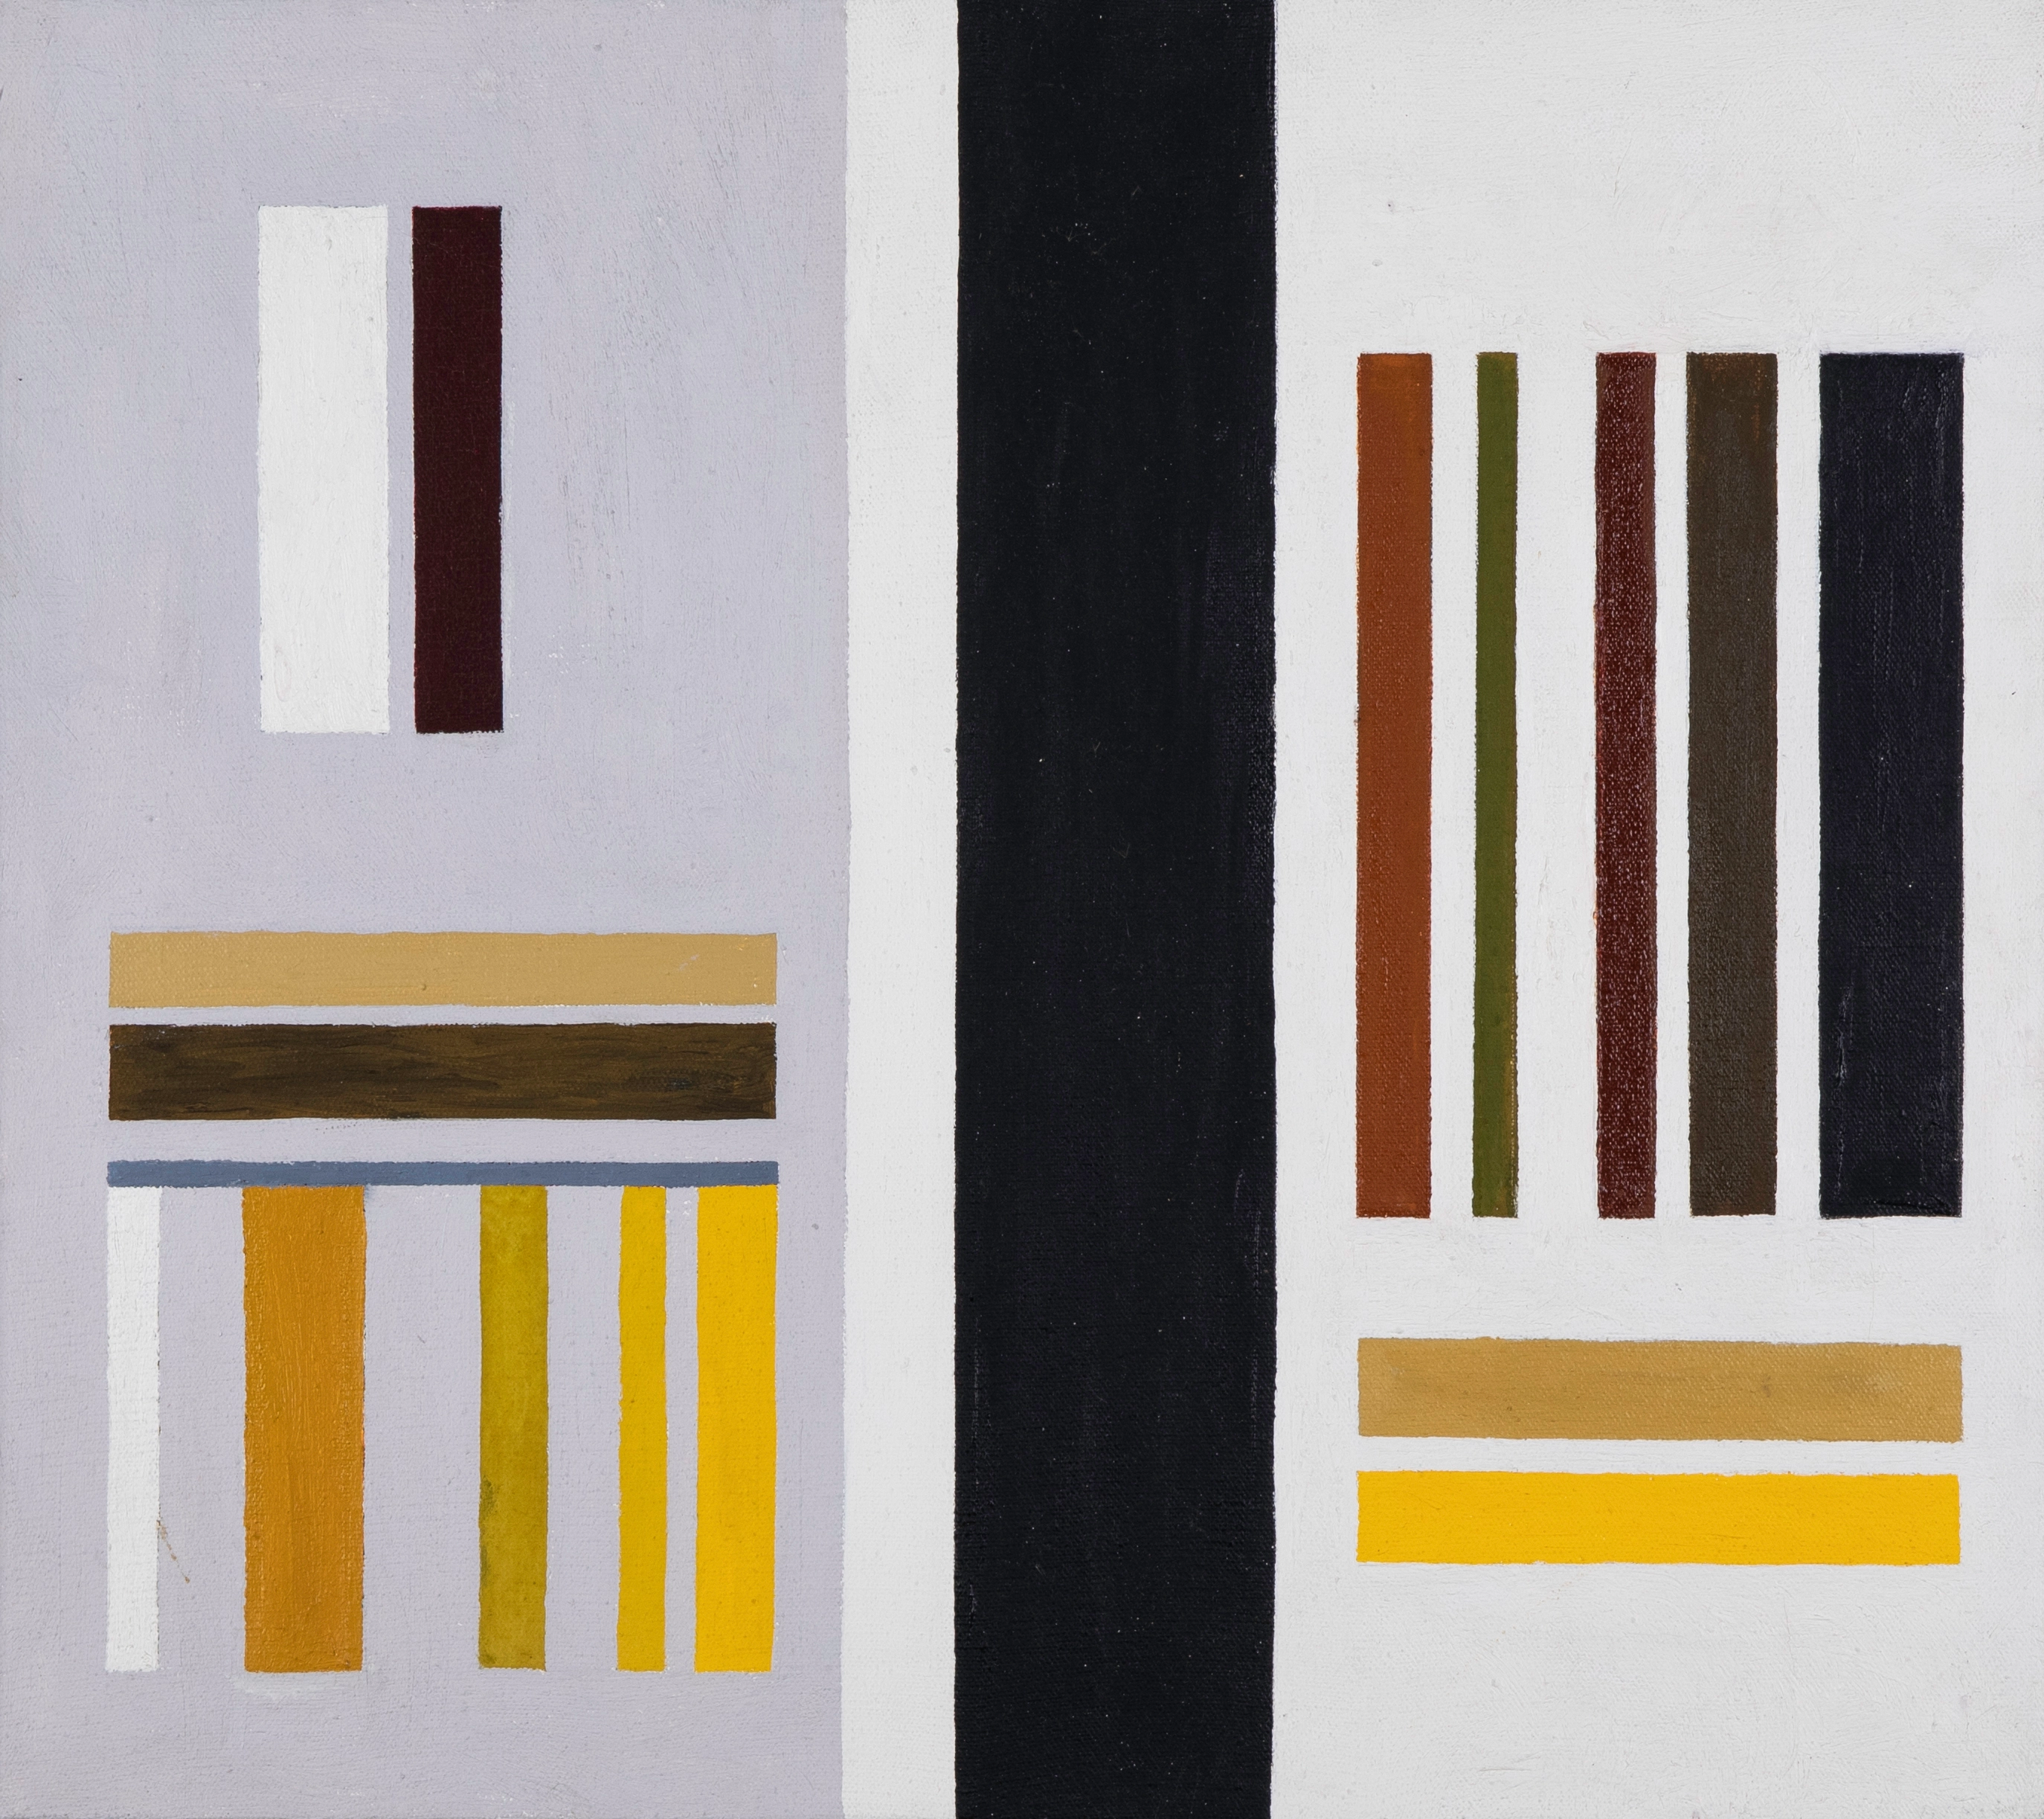 Oil on canvas painting of vertical and horizontal black, yellows and brown rectangles of varying thicknesses; a thick black line runs down the middle, separating the muted purple background on the left with the white background on the right.